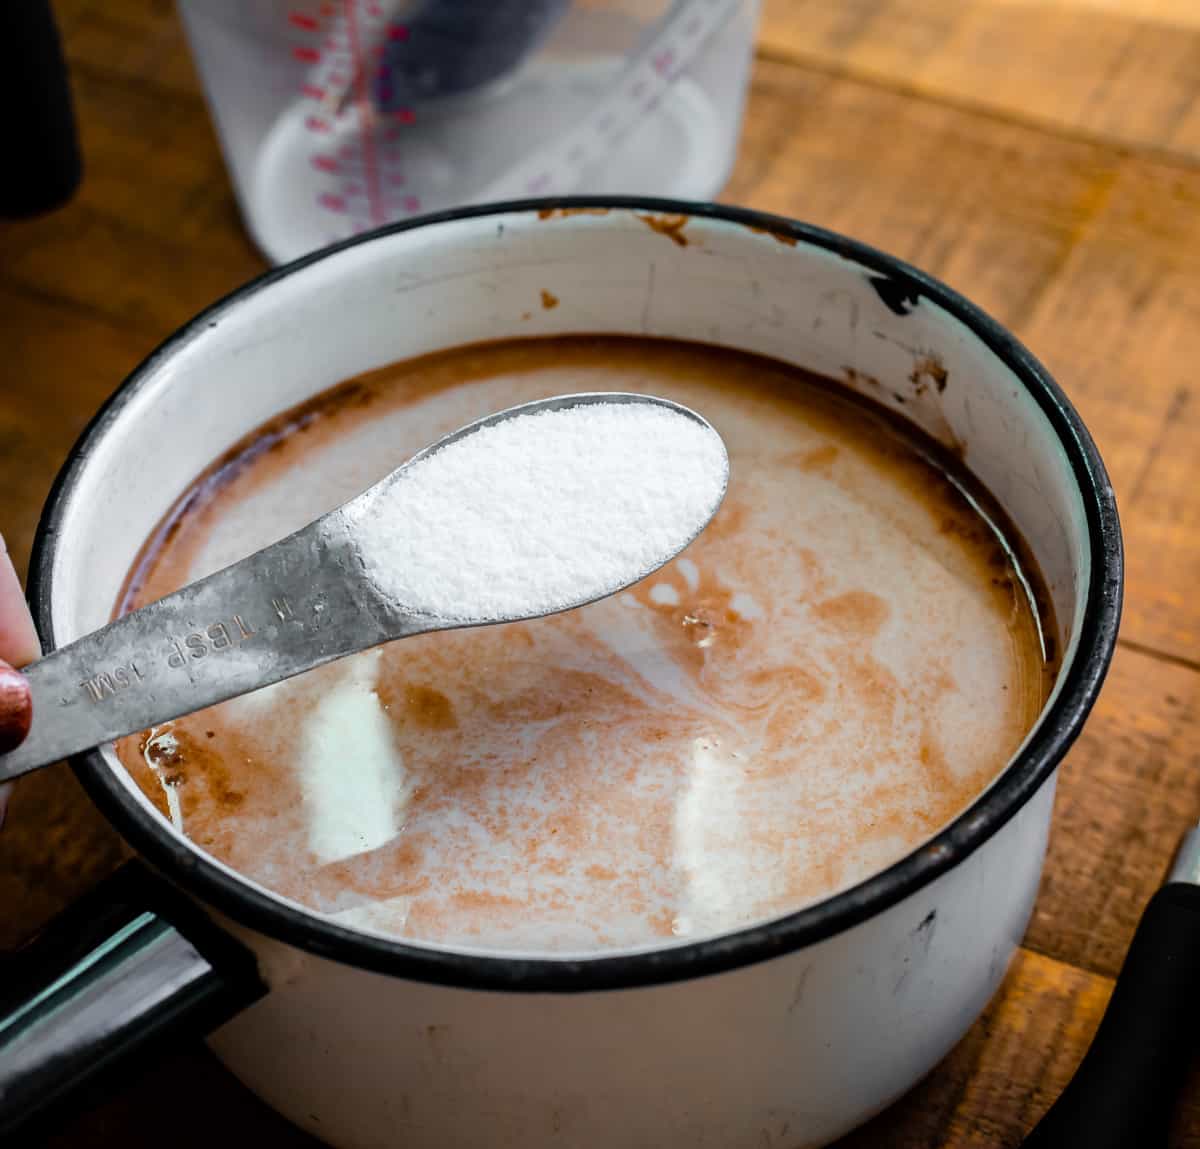 Adding sugar to a white pot full of hot chocolate.